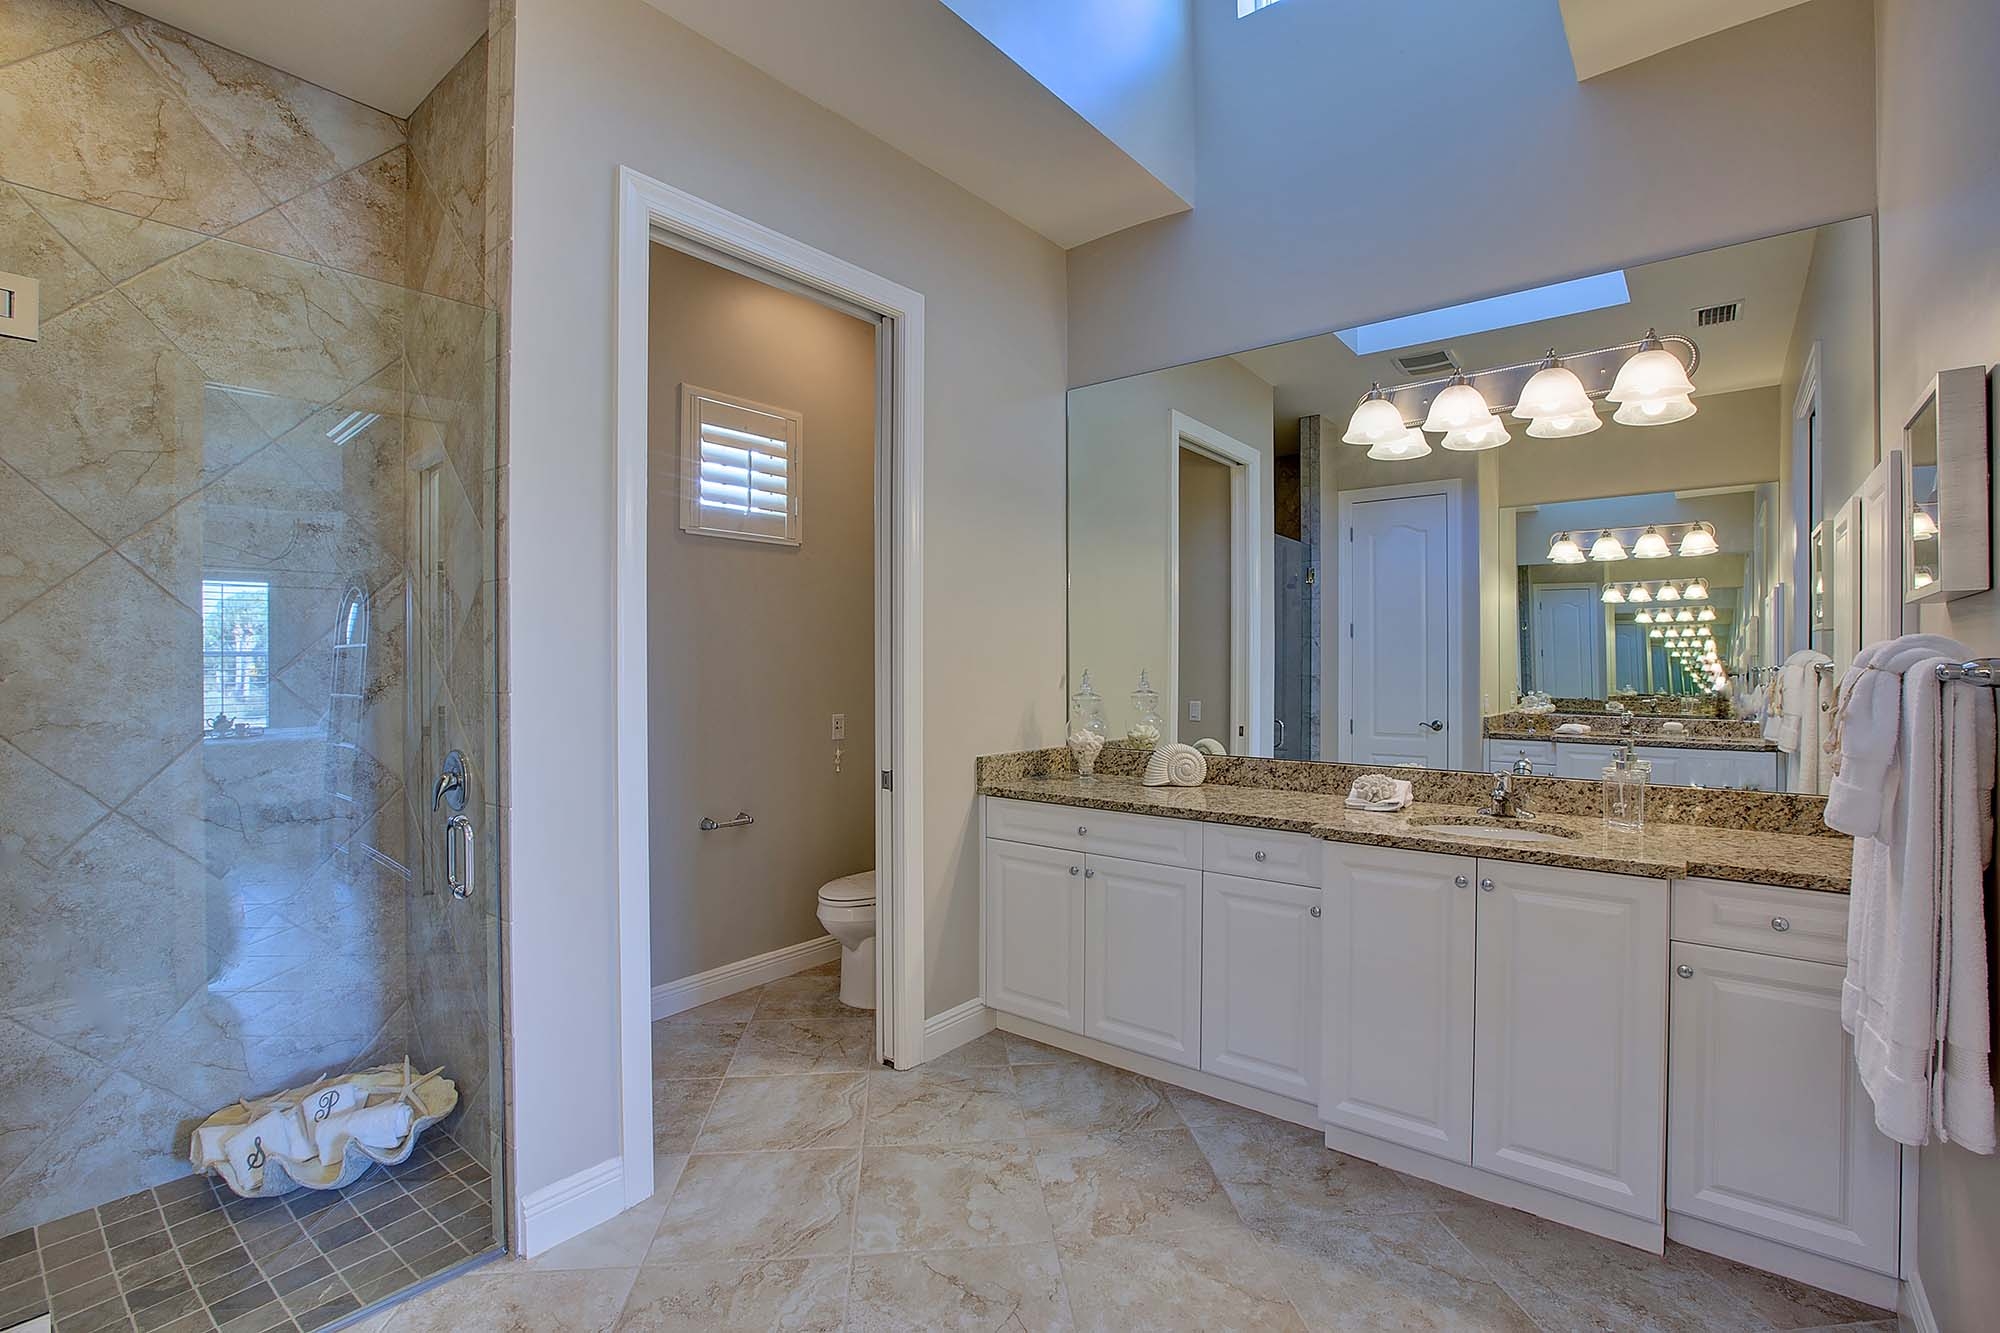 The master bathroom in the Captiva Model Home at Shell Point Retirement Community